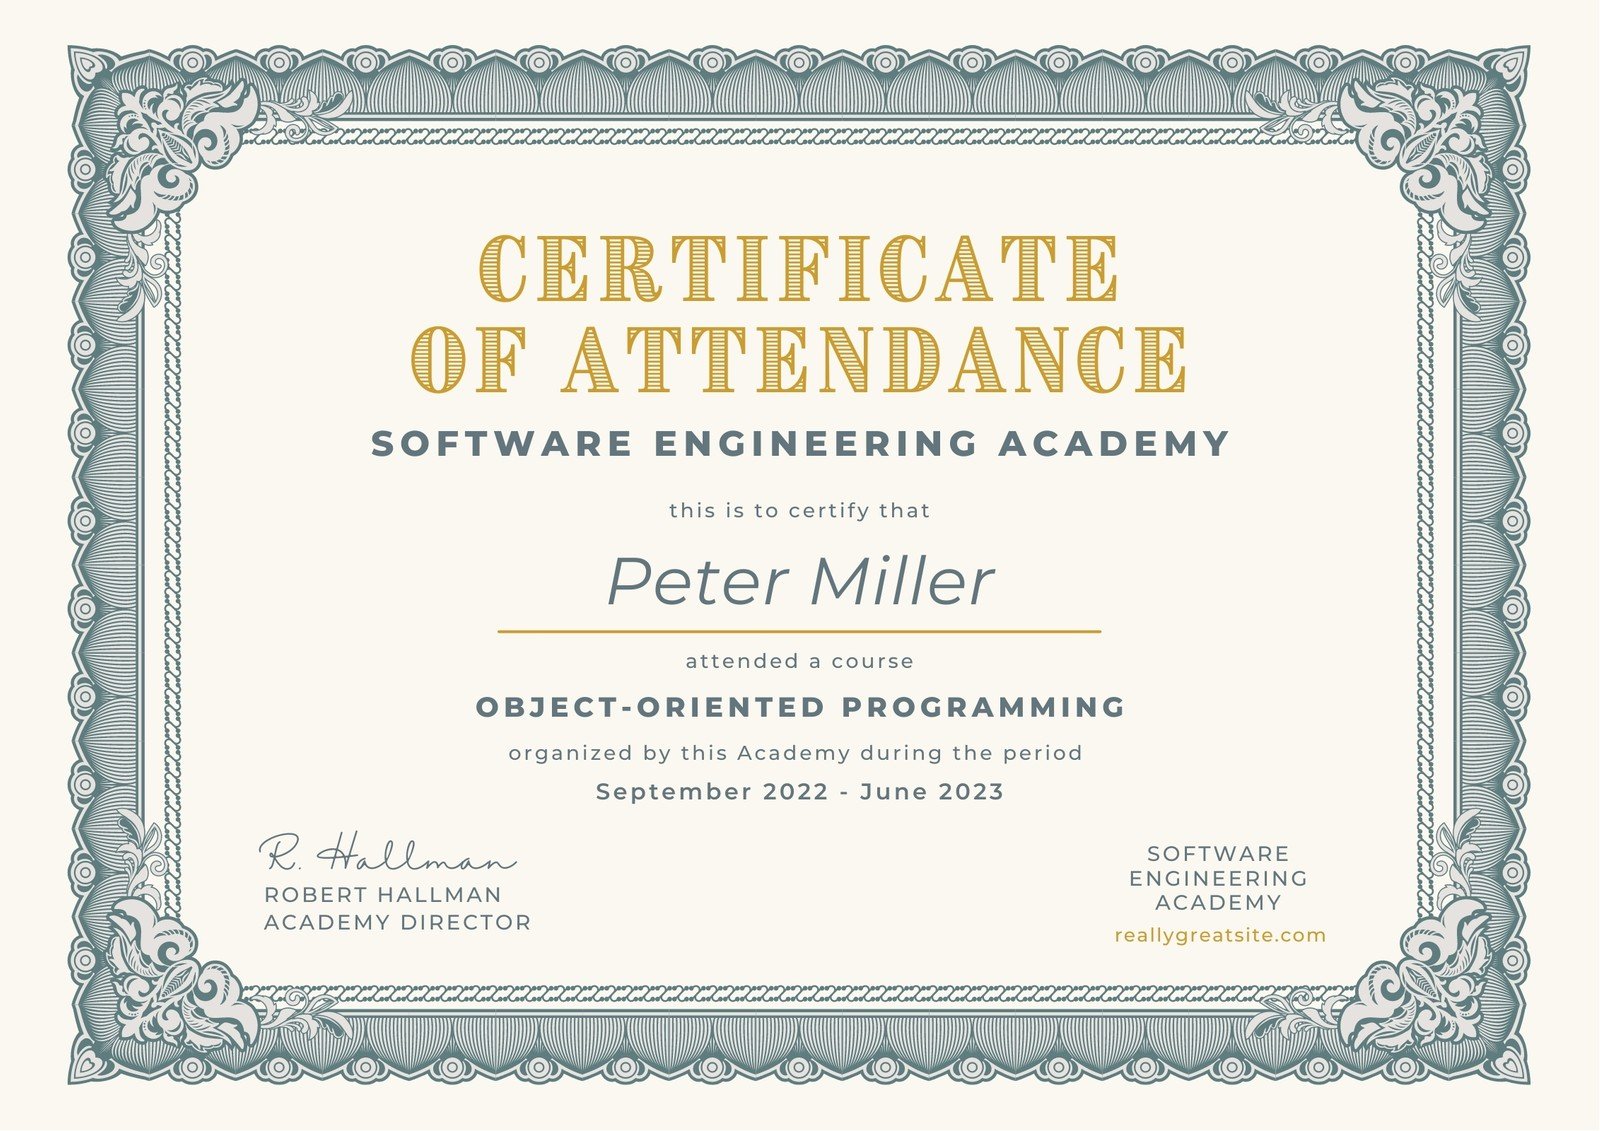 Customize 22+ Attendance Certificates Templates Online - Canva Intended For Conference Certificate Of Attendance Template